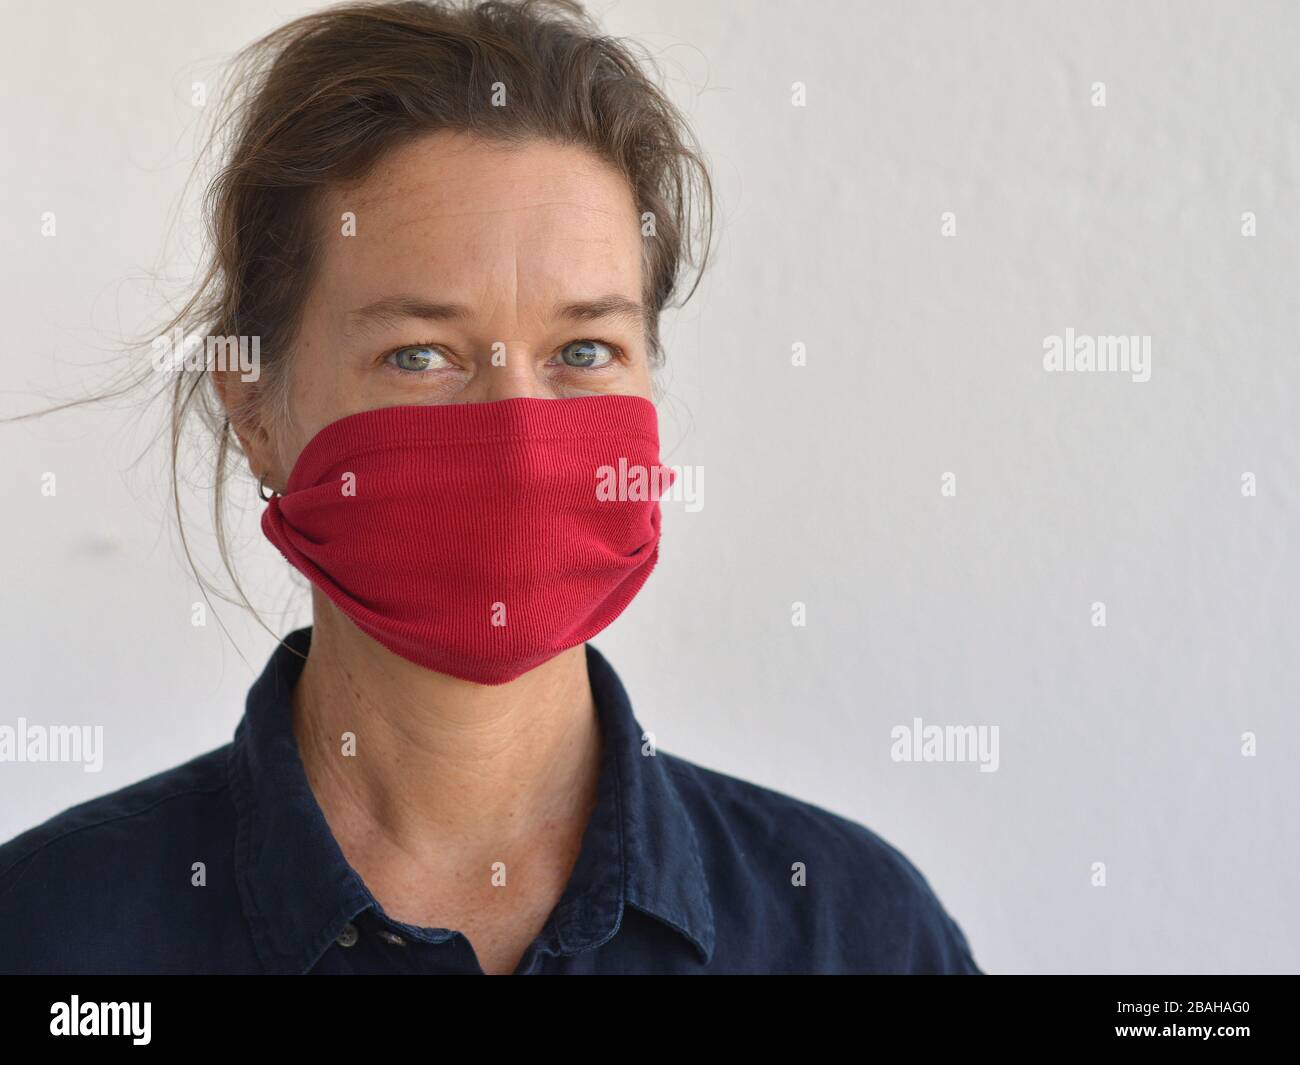 Caucasian woman poses for the camera with her DIY face mask (made from an old t-shirt sleeve) during the 2019/20 corona-virus pandemic. Stock Photo